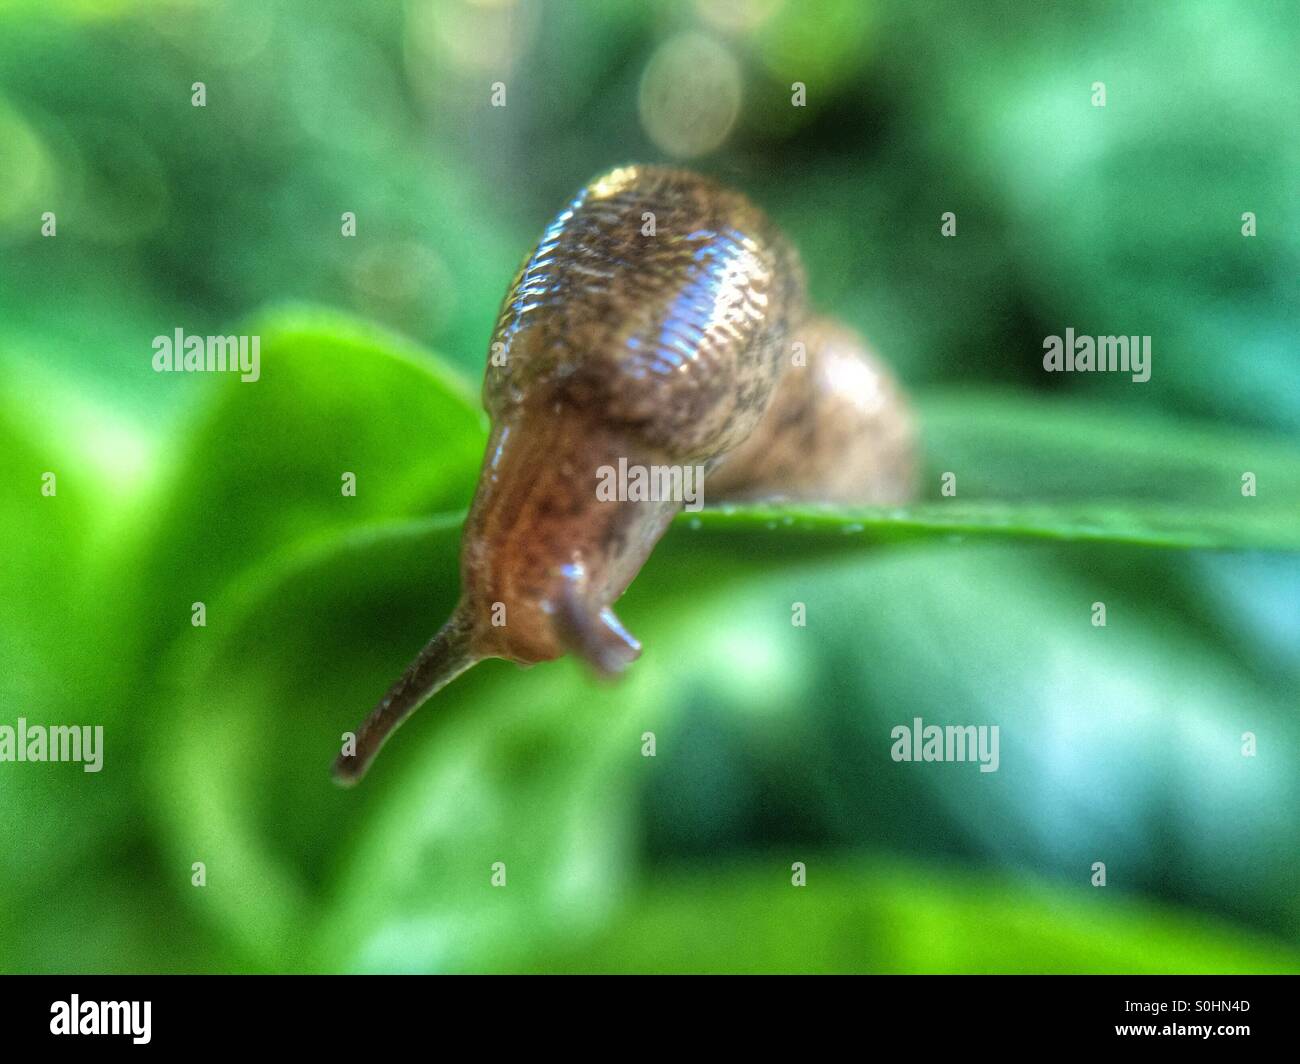 Icelandic snail in my garden. Taken with my iphone 6 plus. Micro lens. Stock Photo